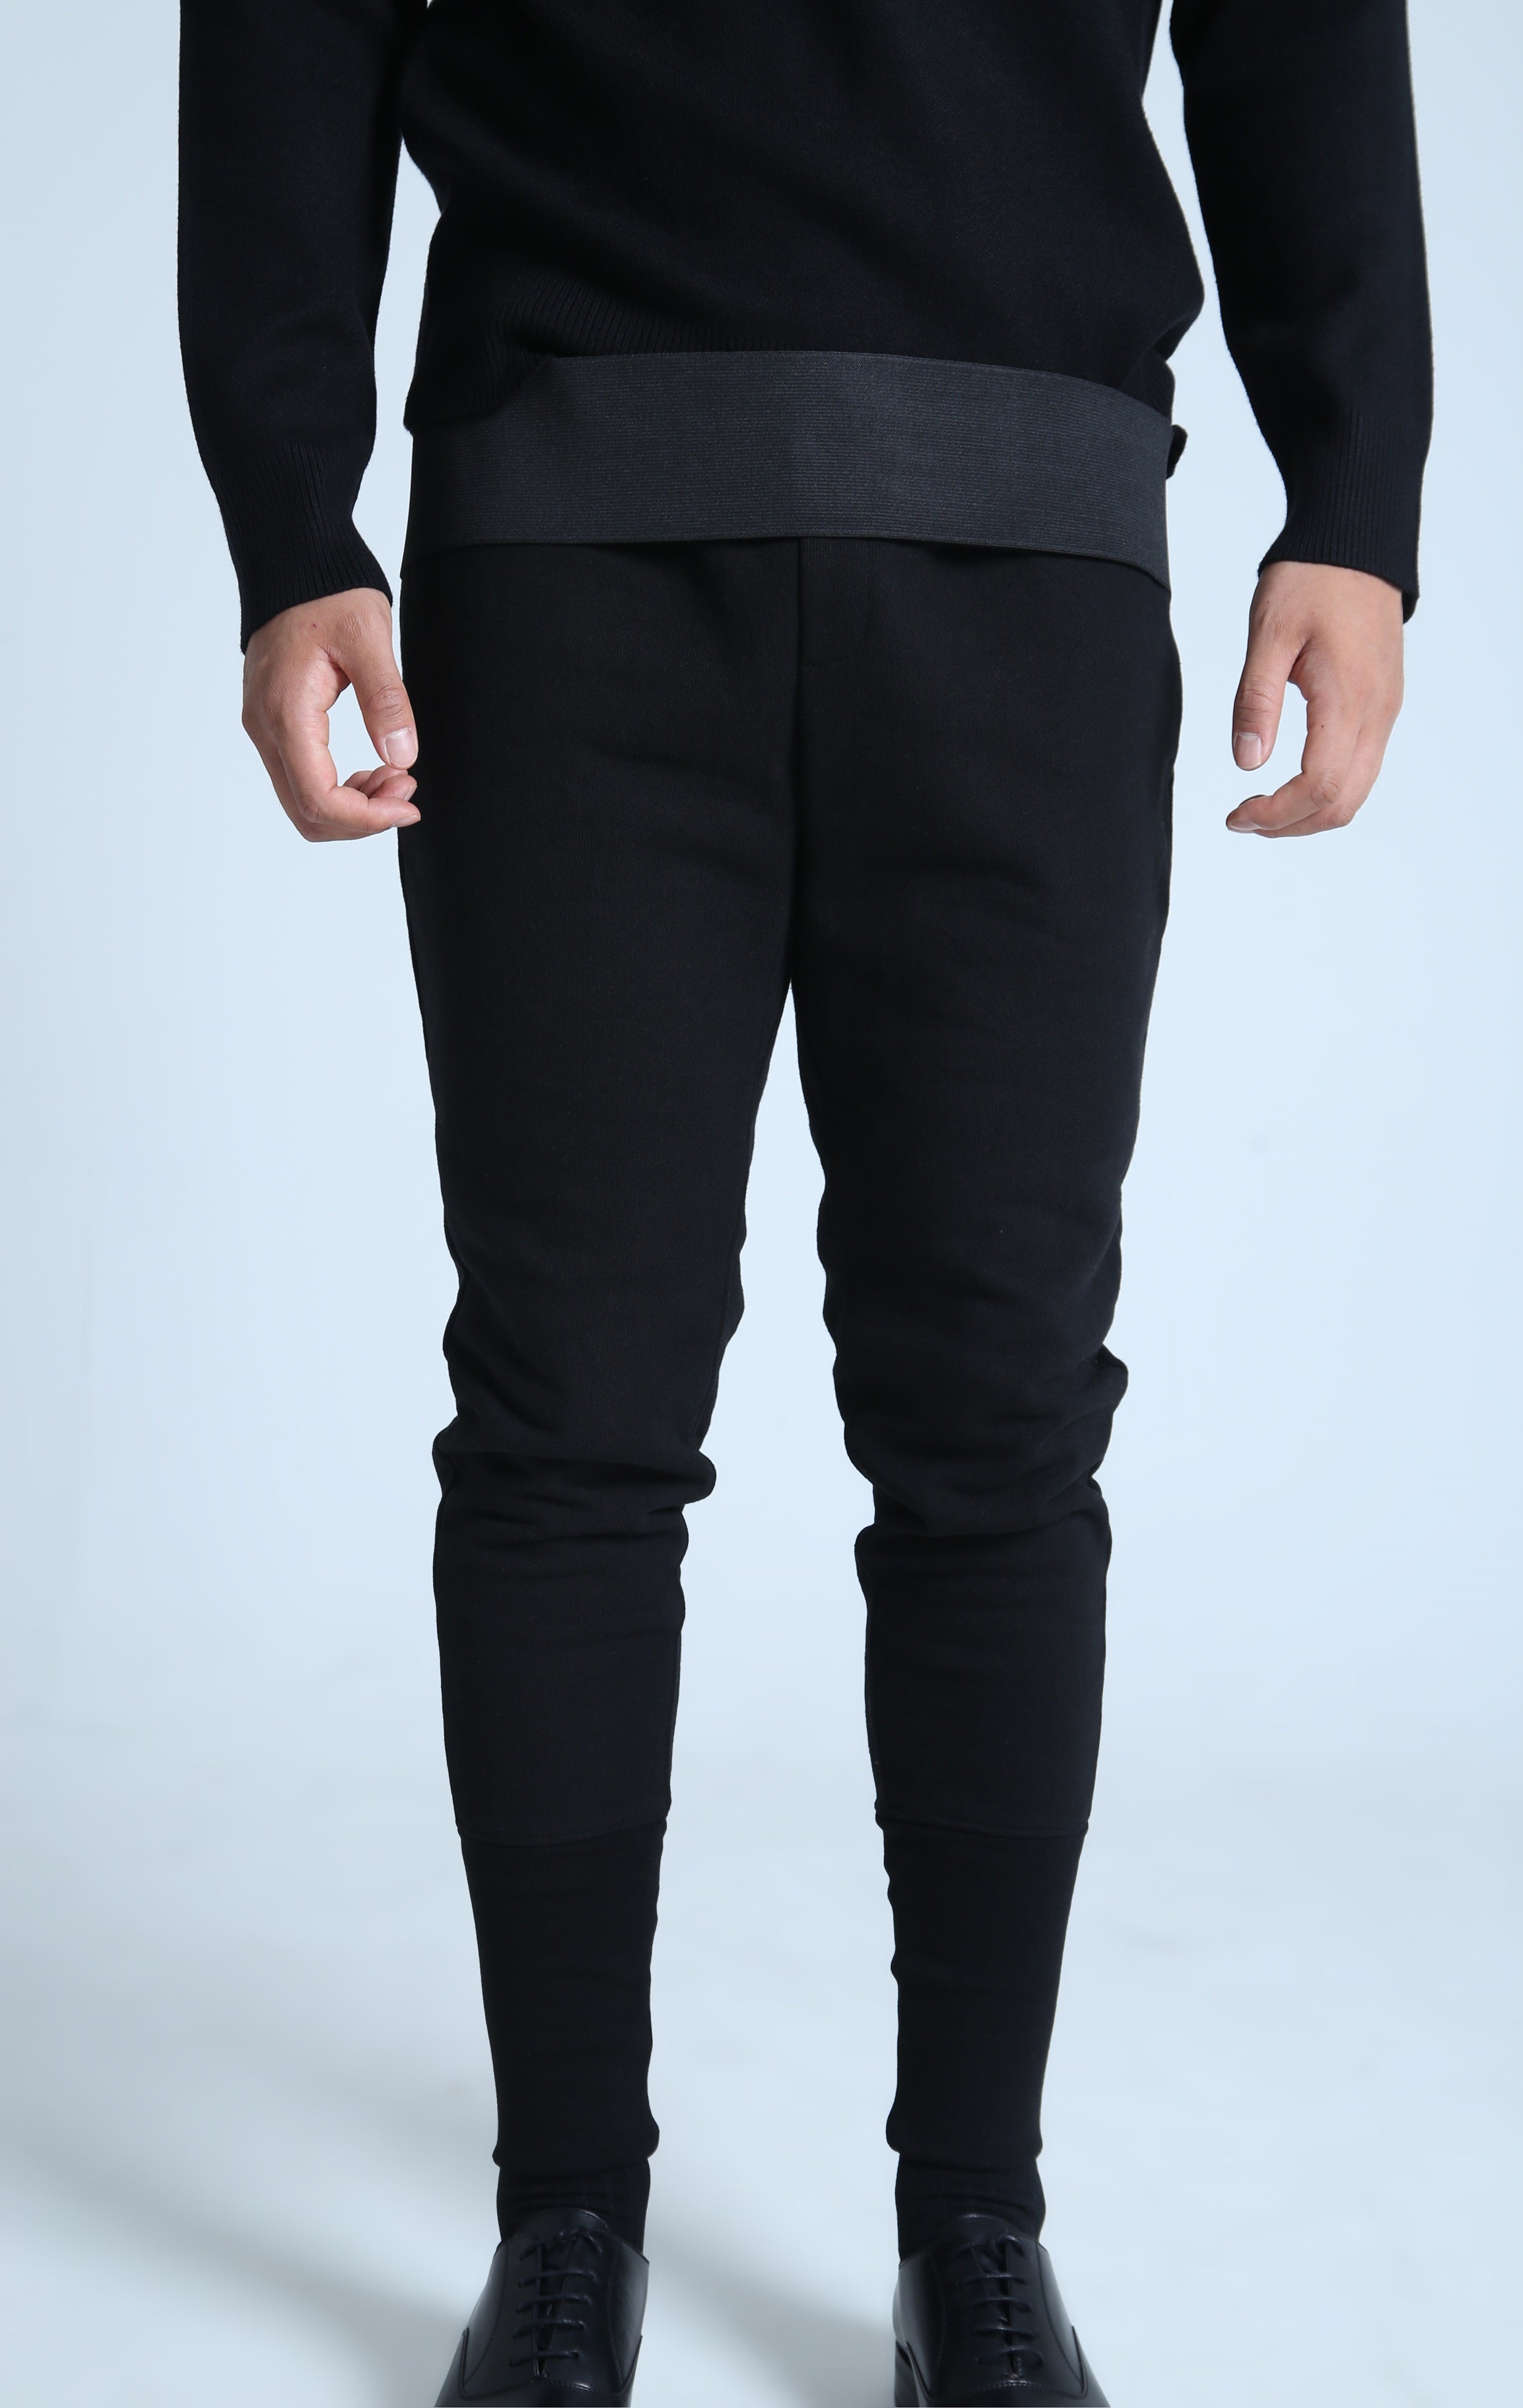 houte couture joggers "tucked-in"